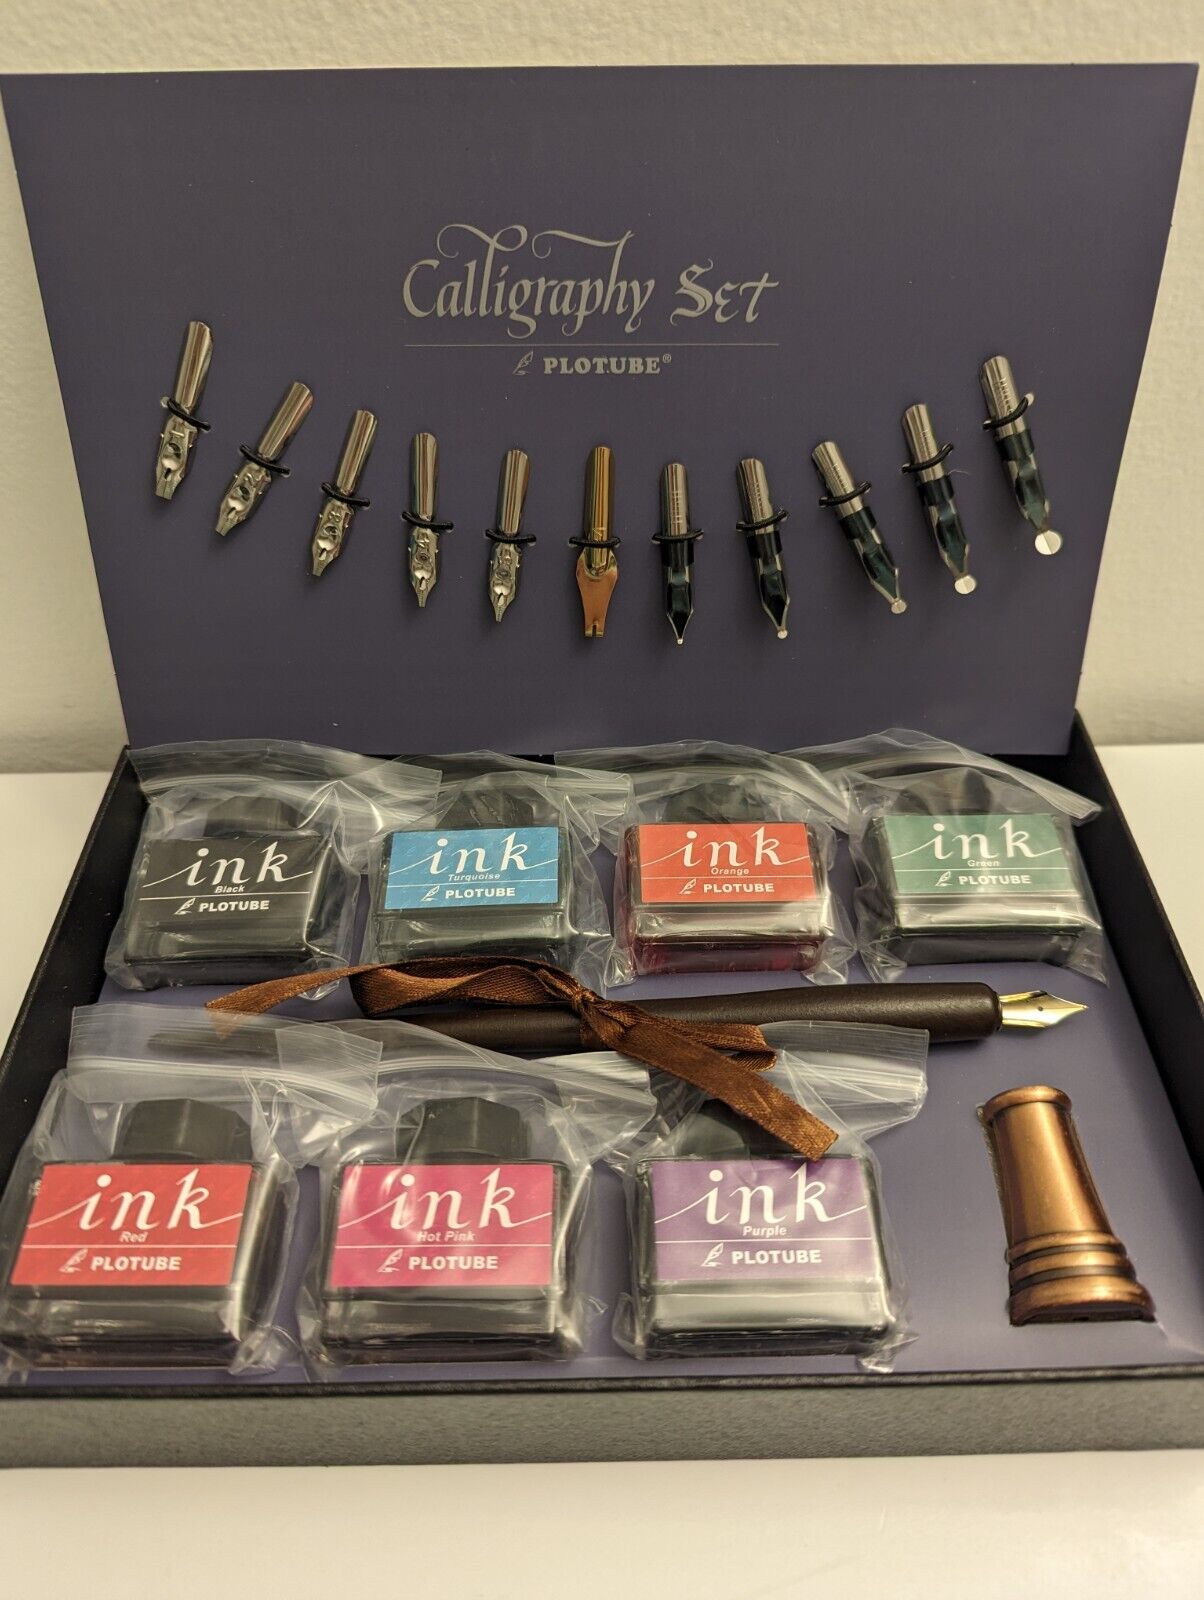 Calligraphy Pen Set – 11 nibs, 7 colors, dip pen, and brass holder